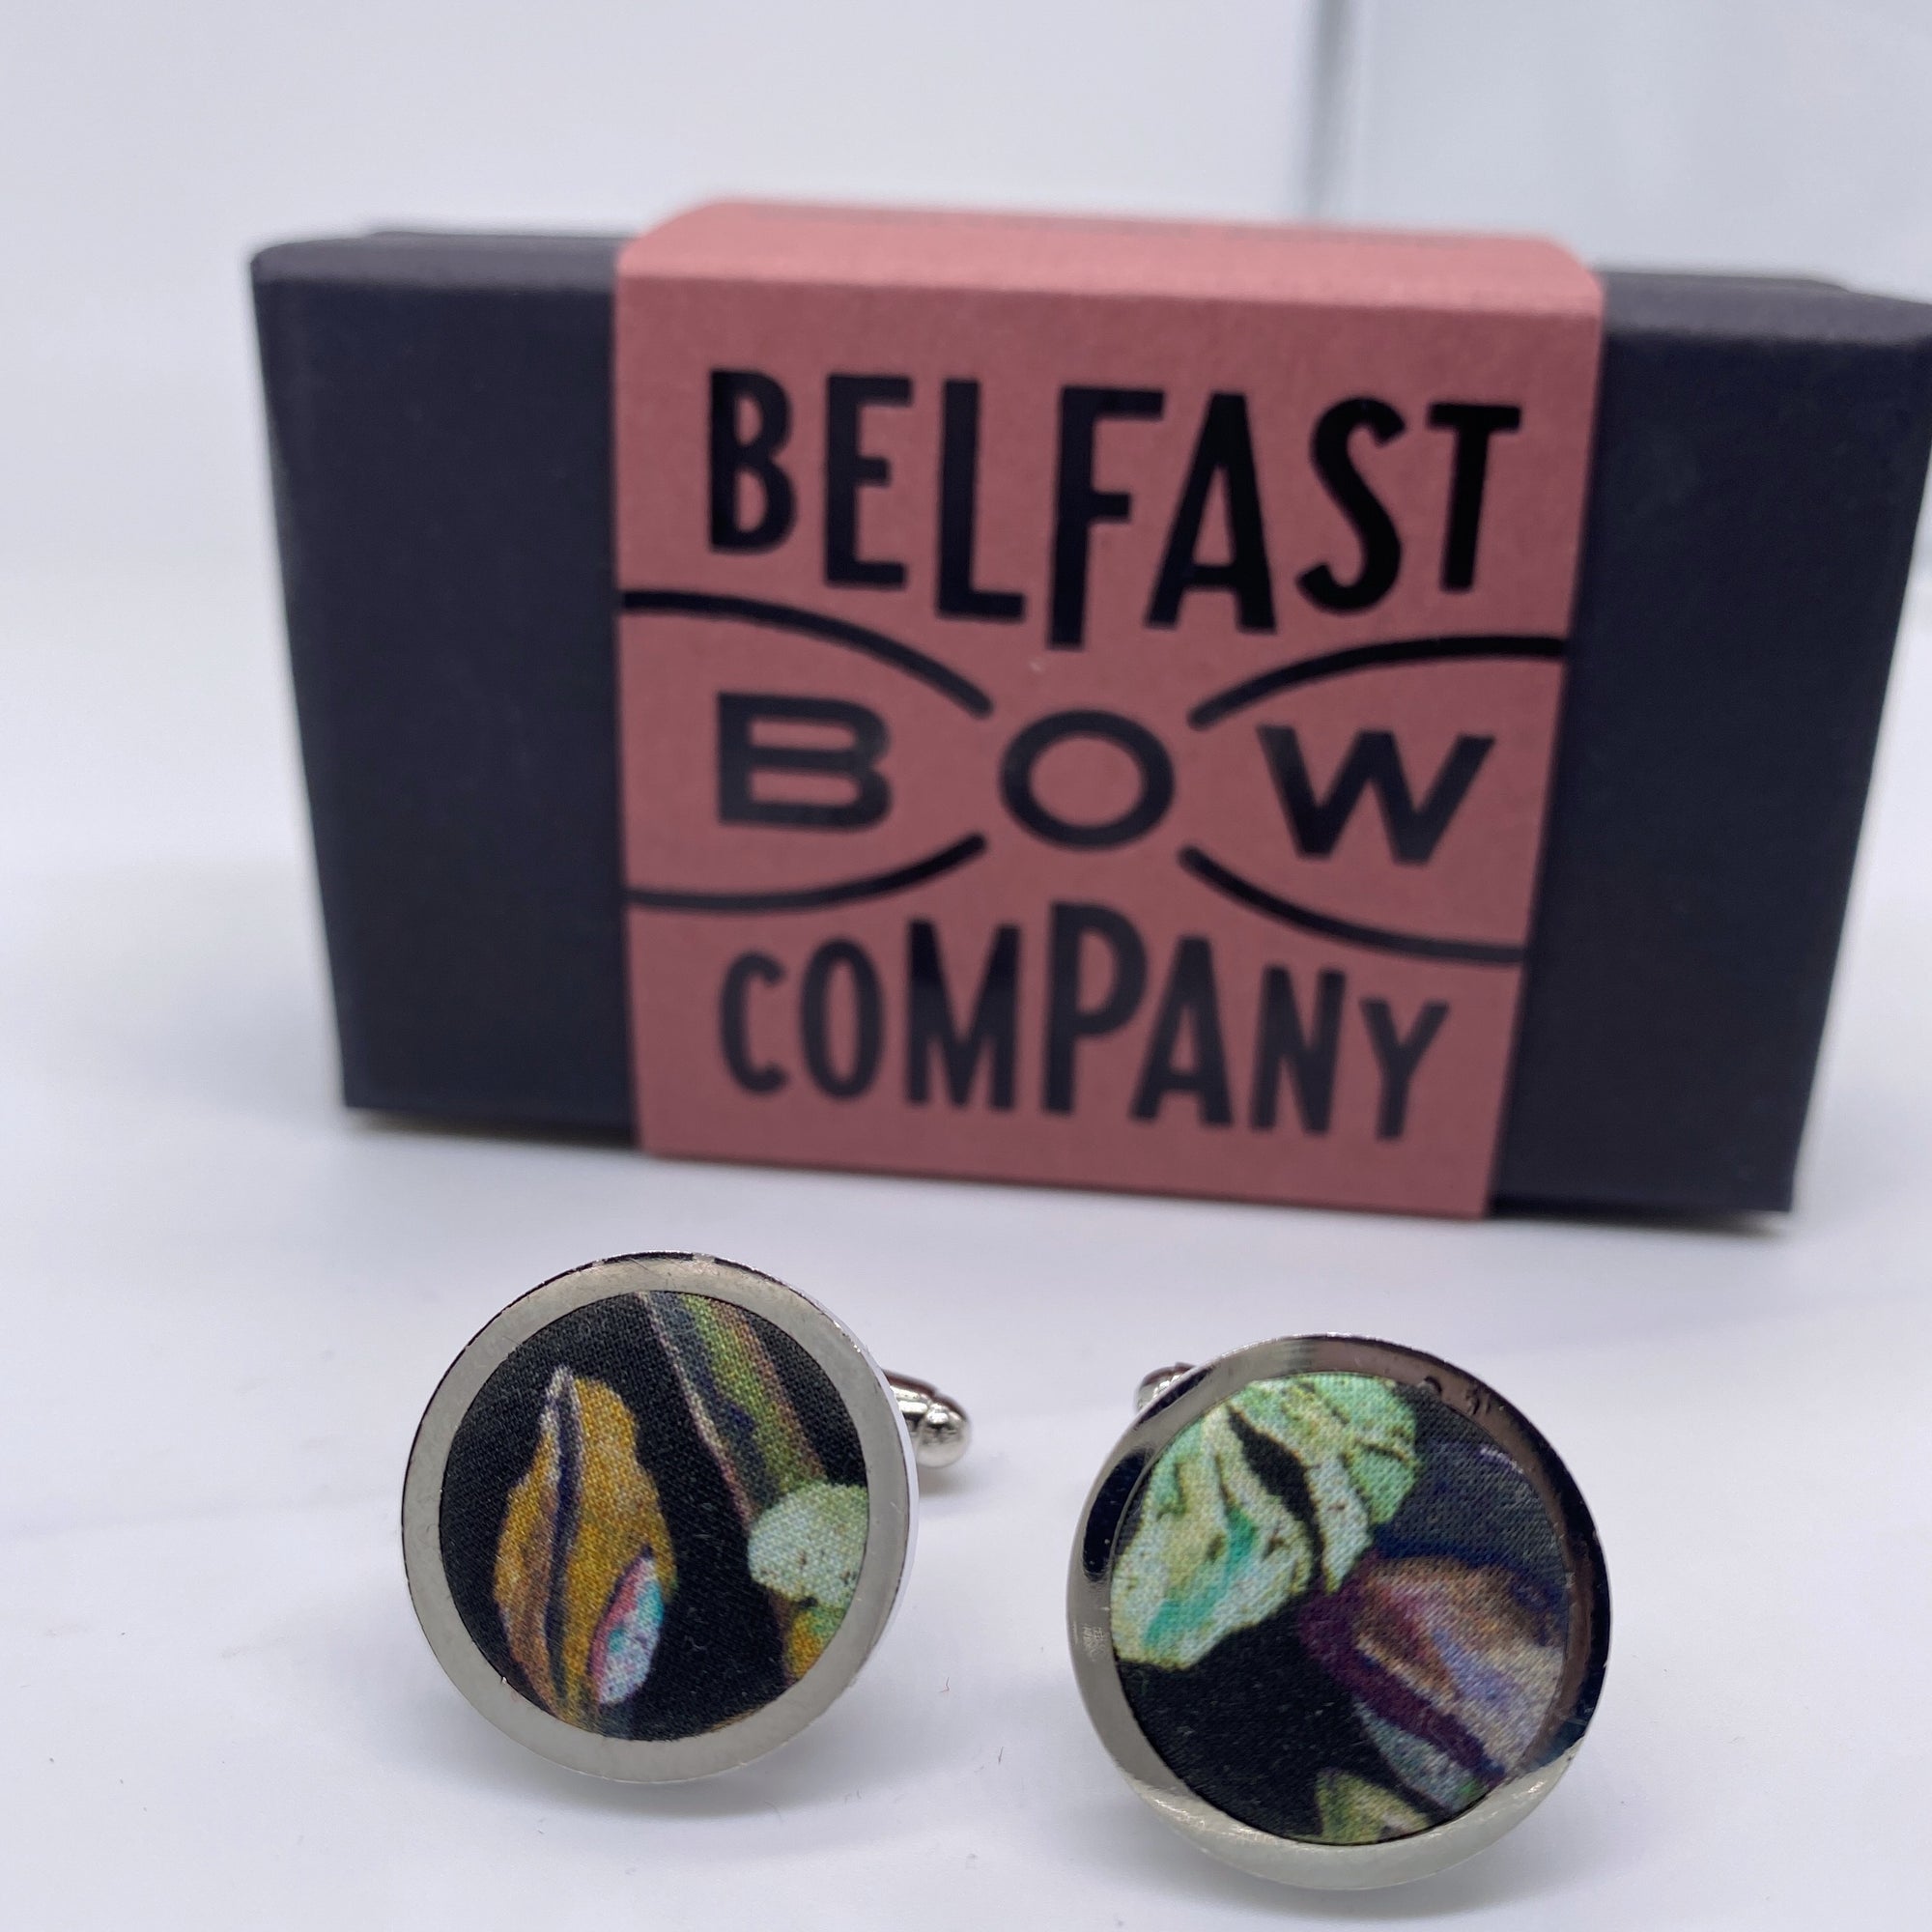 Black Floral Cufflinks by the Belfast Bow Company